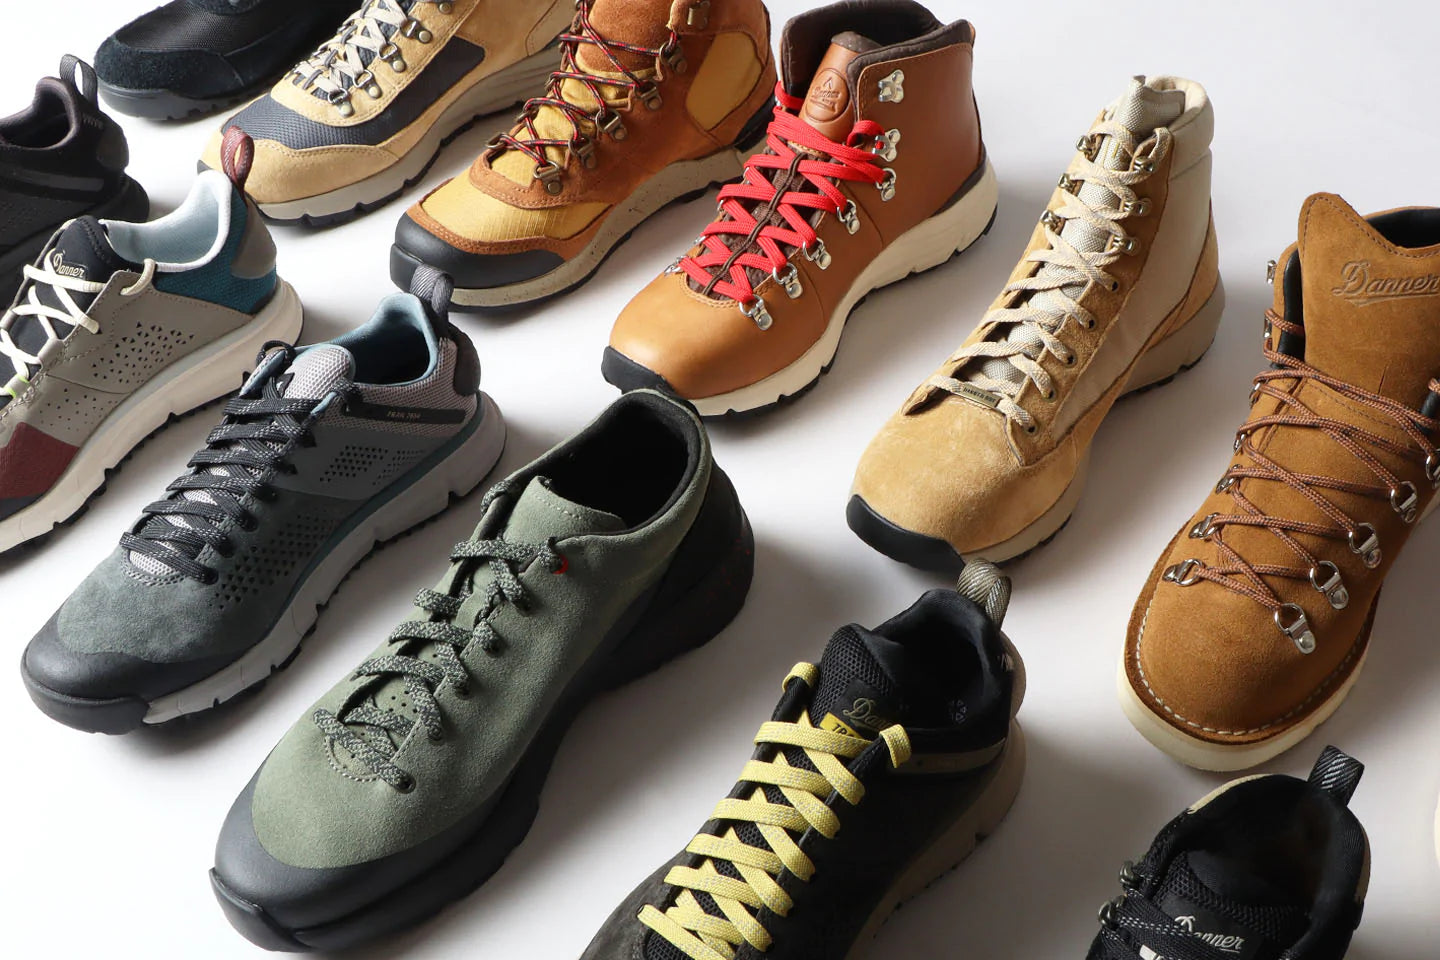 Danner Boot Fit Guide at Urban Industry